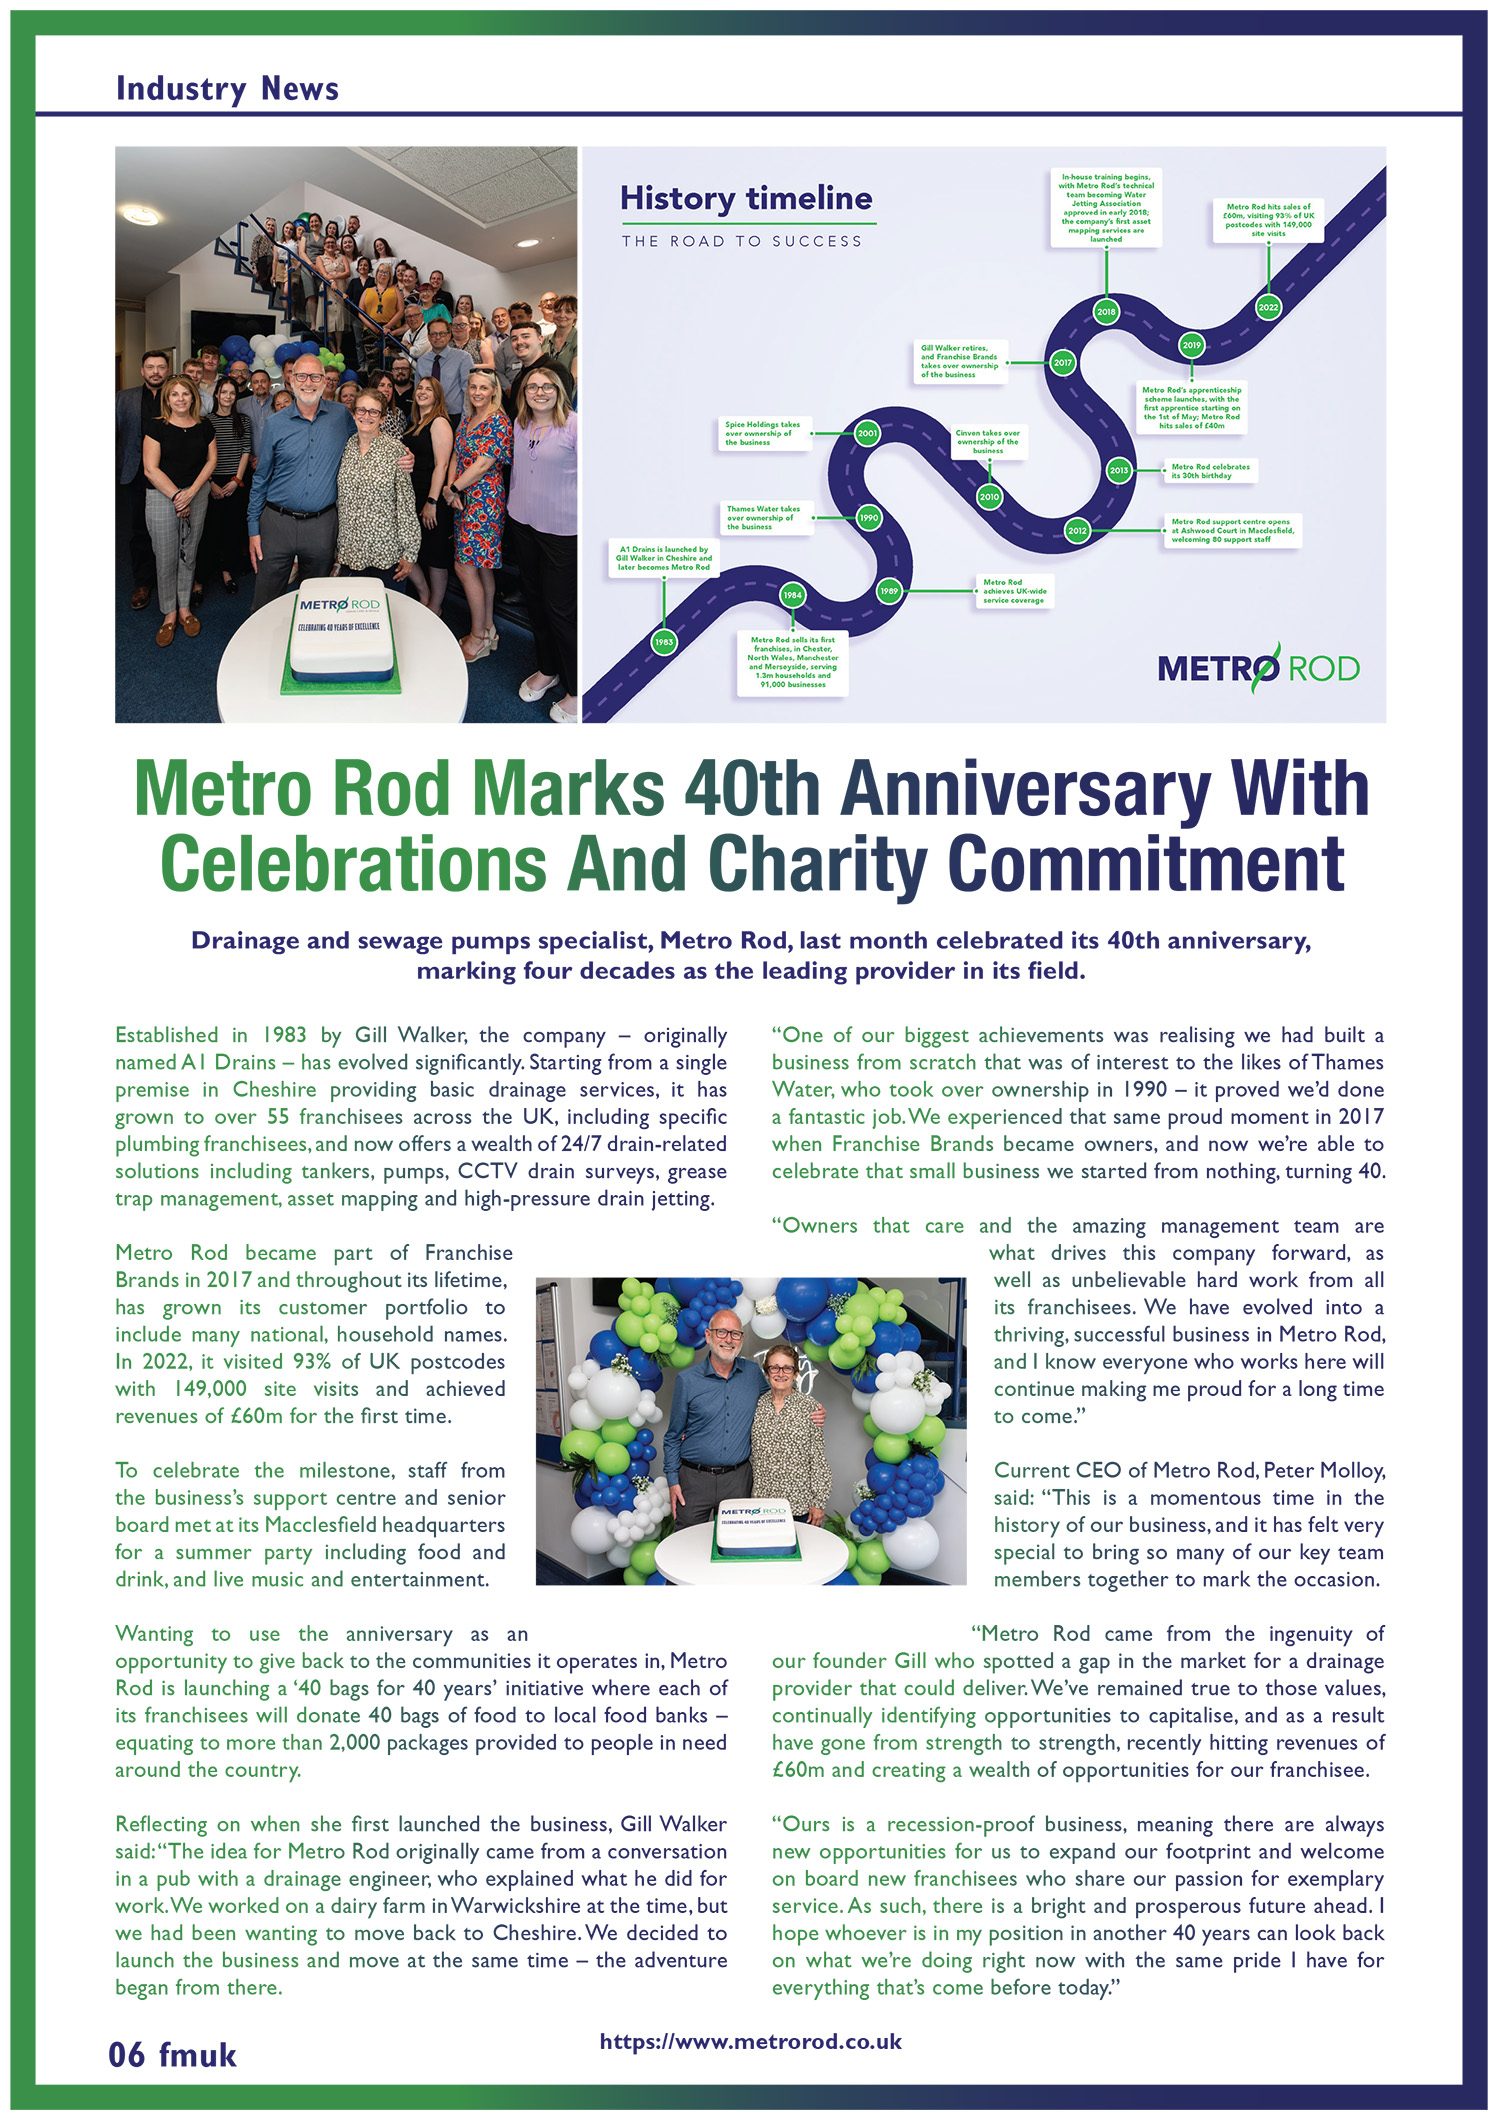 Metro Rod Marks 40th Anniversary With Celebrations And Charity Commitment